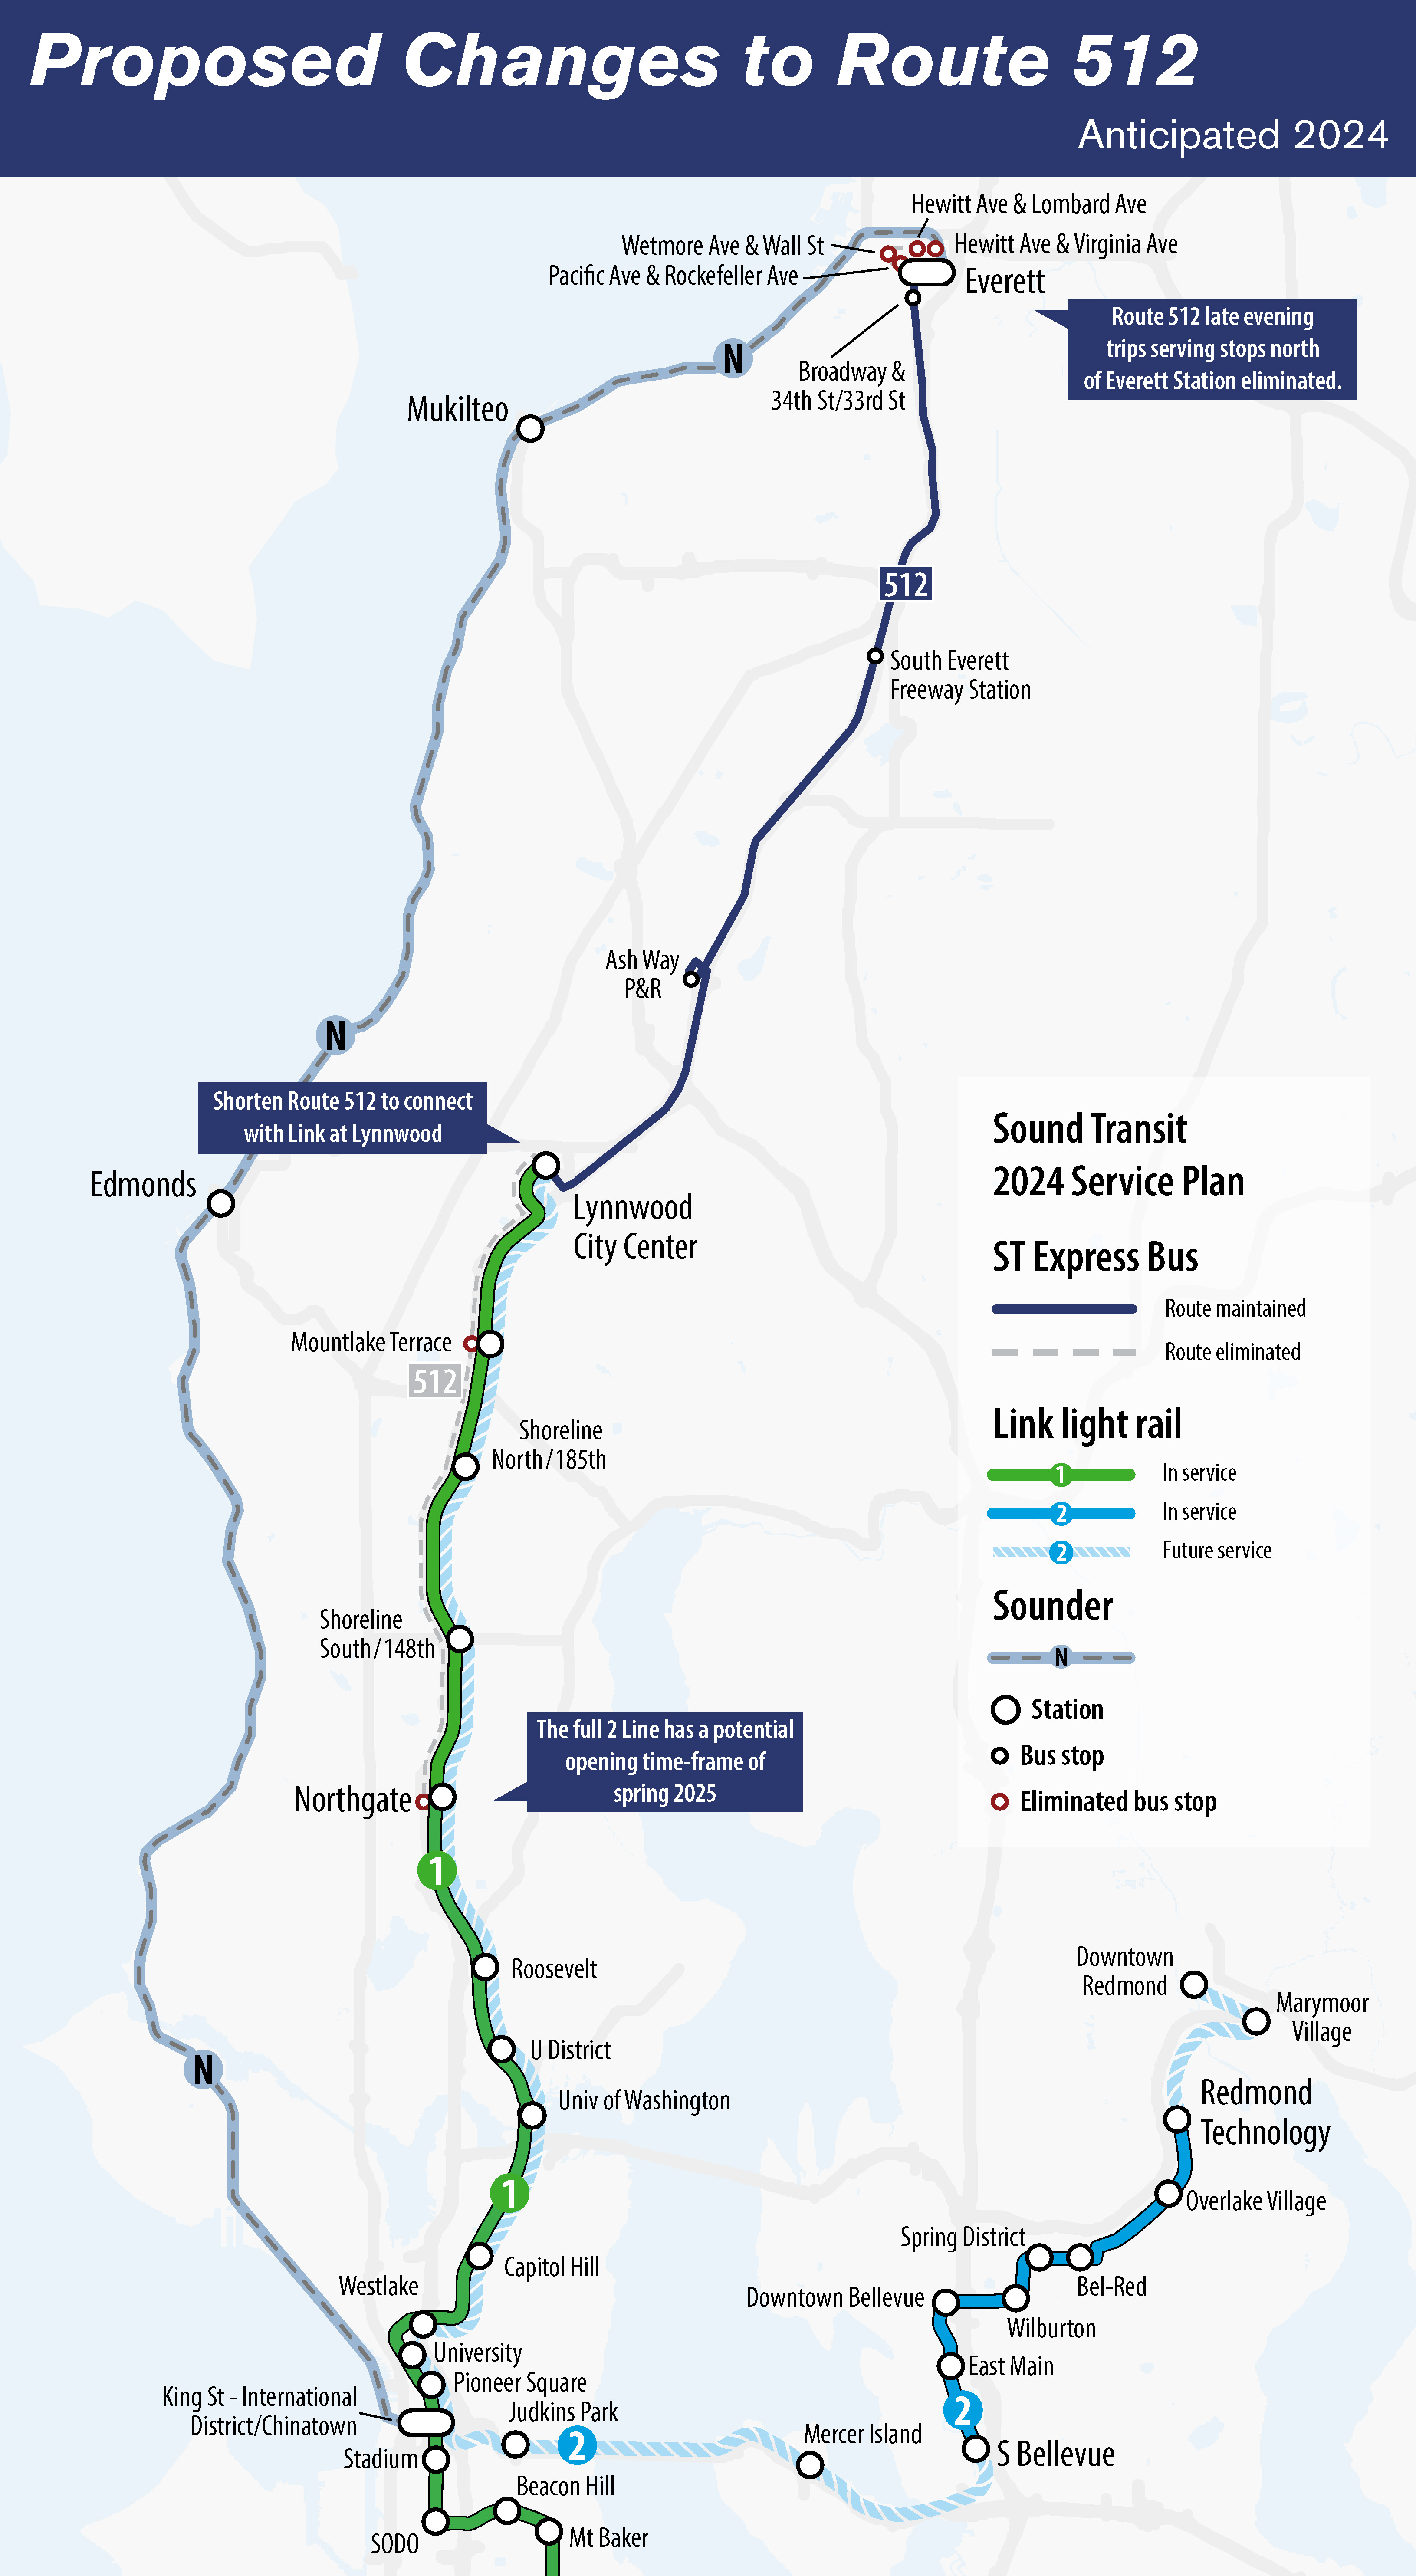 A map showing Express route 512 as it relates to Sound Transit's transit services in Seattle and the north and east subareas that include Everett, Seattle and Redmond. 


        The map shows Express route 512 in a strong dark blue line compared to other colored routes depicting Sounder train service, Link light rail service and other Express bus routes. Both the existing route 512 service area, as well as the future route 512 service area, are illustrated - the future route is bolded while the existing route is shown in a light gray dotted line. 
        
        
        The current Express route 512 in light gray is depicted as it currently runs from Everett to Northgate Station along Interstate 5. However, the future route in dark blue is depicted running from Everett in the north, to the new southernmost destination at Lynnwood City Center, which will be the southernmost destination once Lynnwood Link Extension opens. 